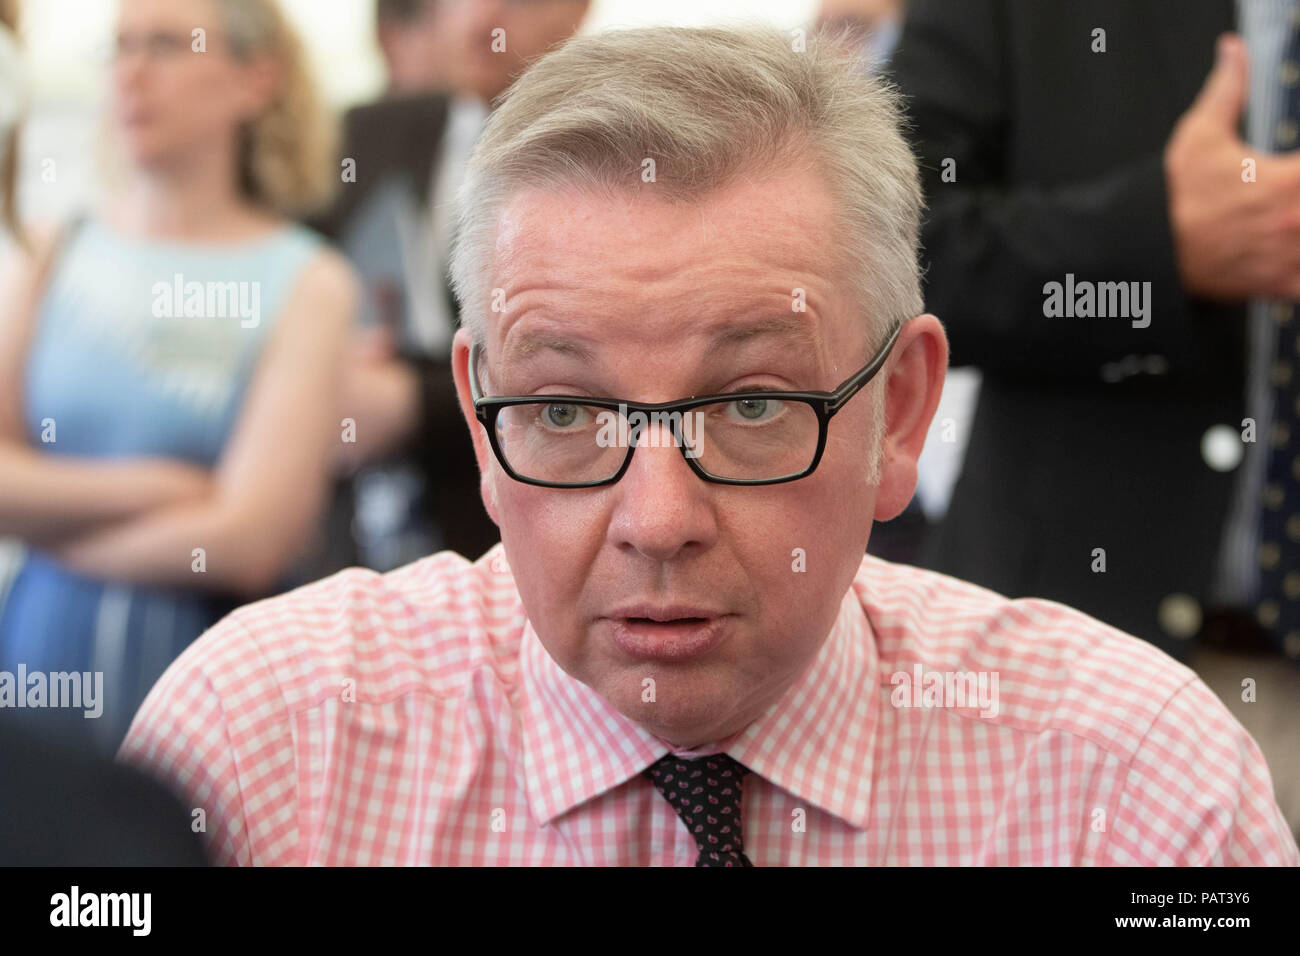 2018 Royal Welsh Show,Builth Wells,Wales. The Rt Hon Michael Gove MP Secretary of State for Environment, Food and Rural Affairs Stock Photo